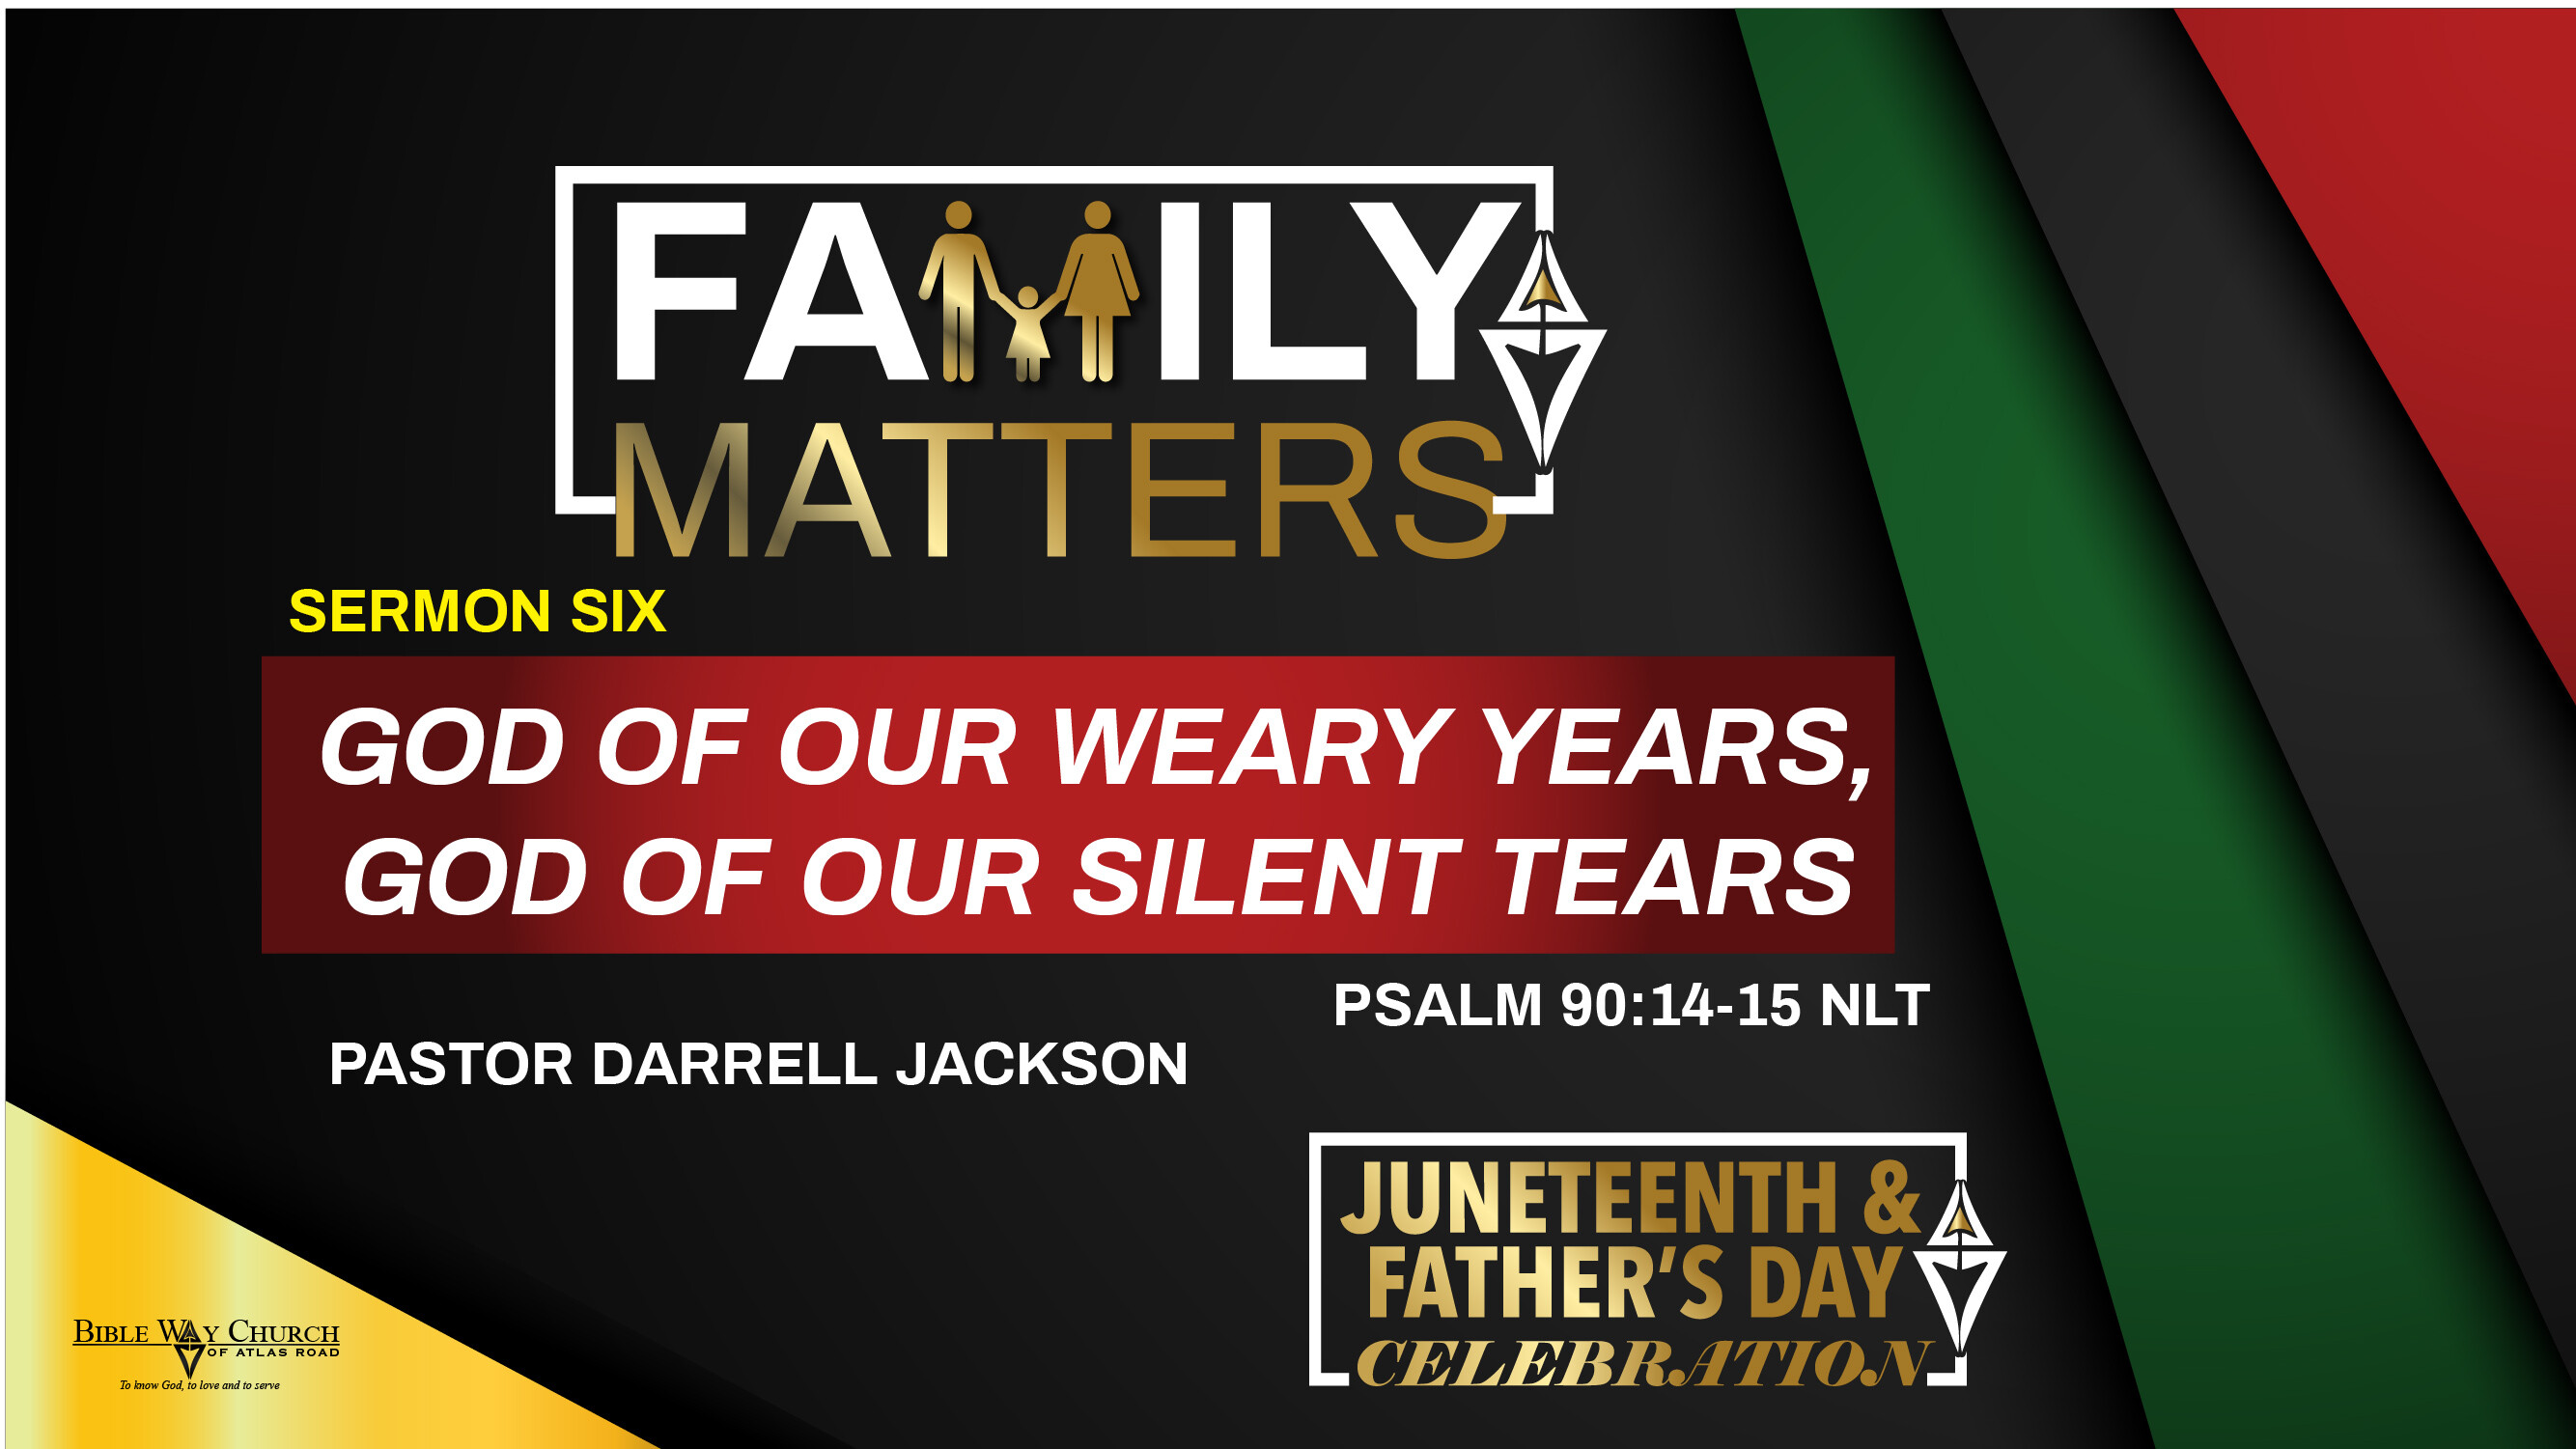 Family Matters |Sermon Six - God of Our Weary Years, God of Our Silent Tears: